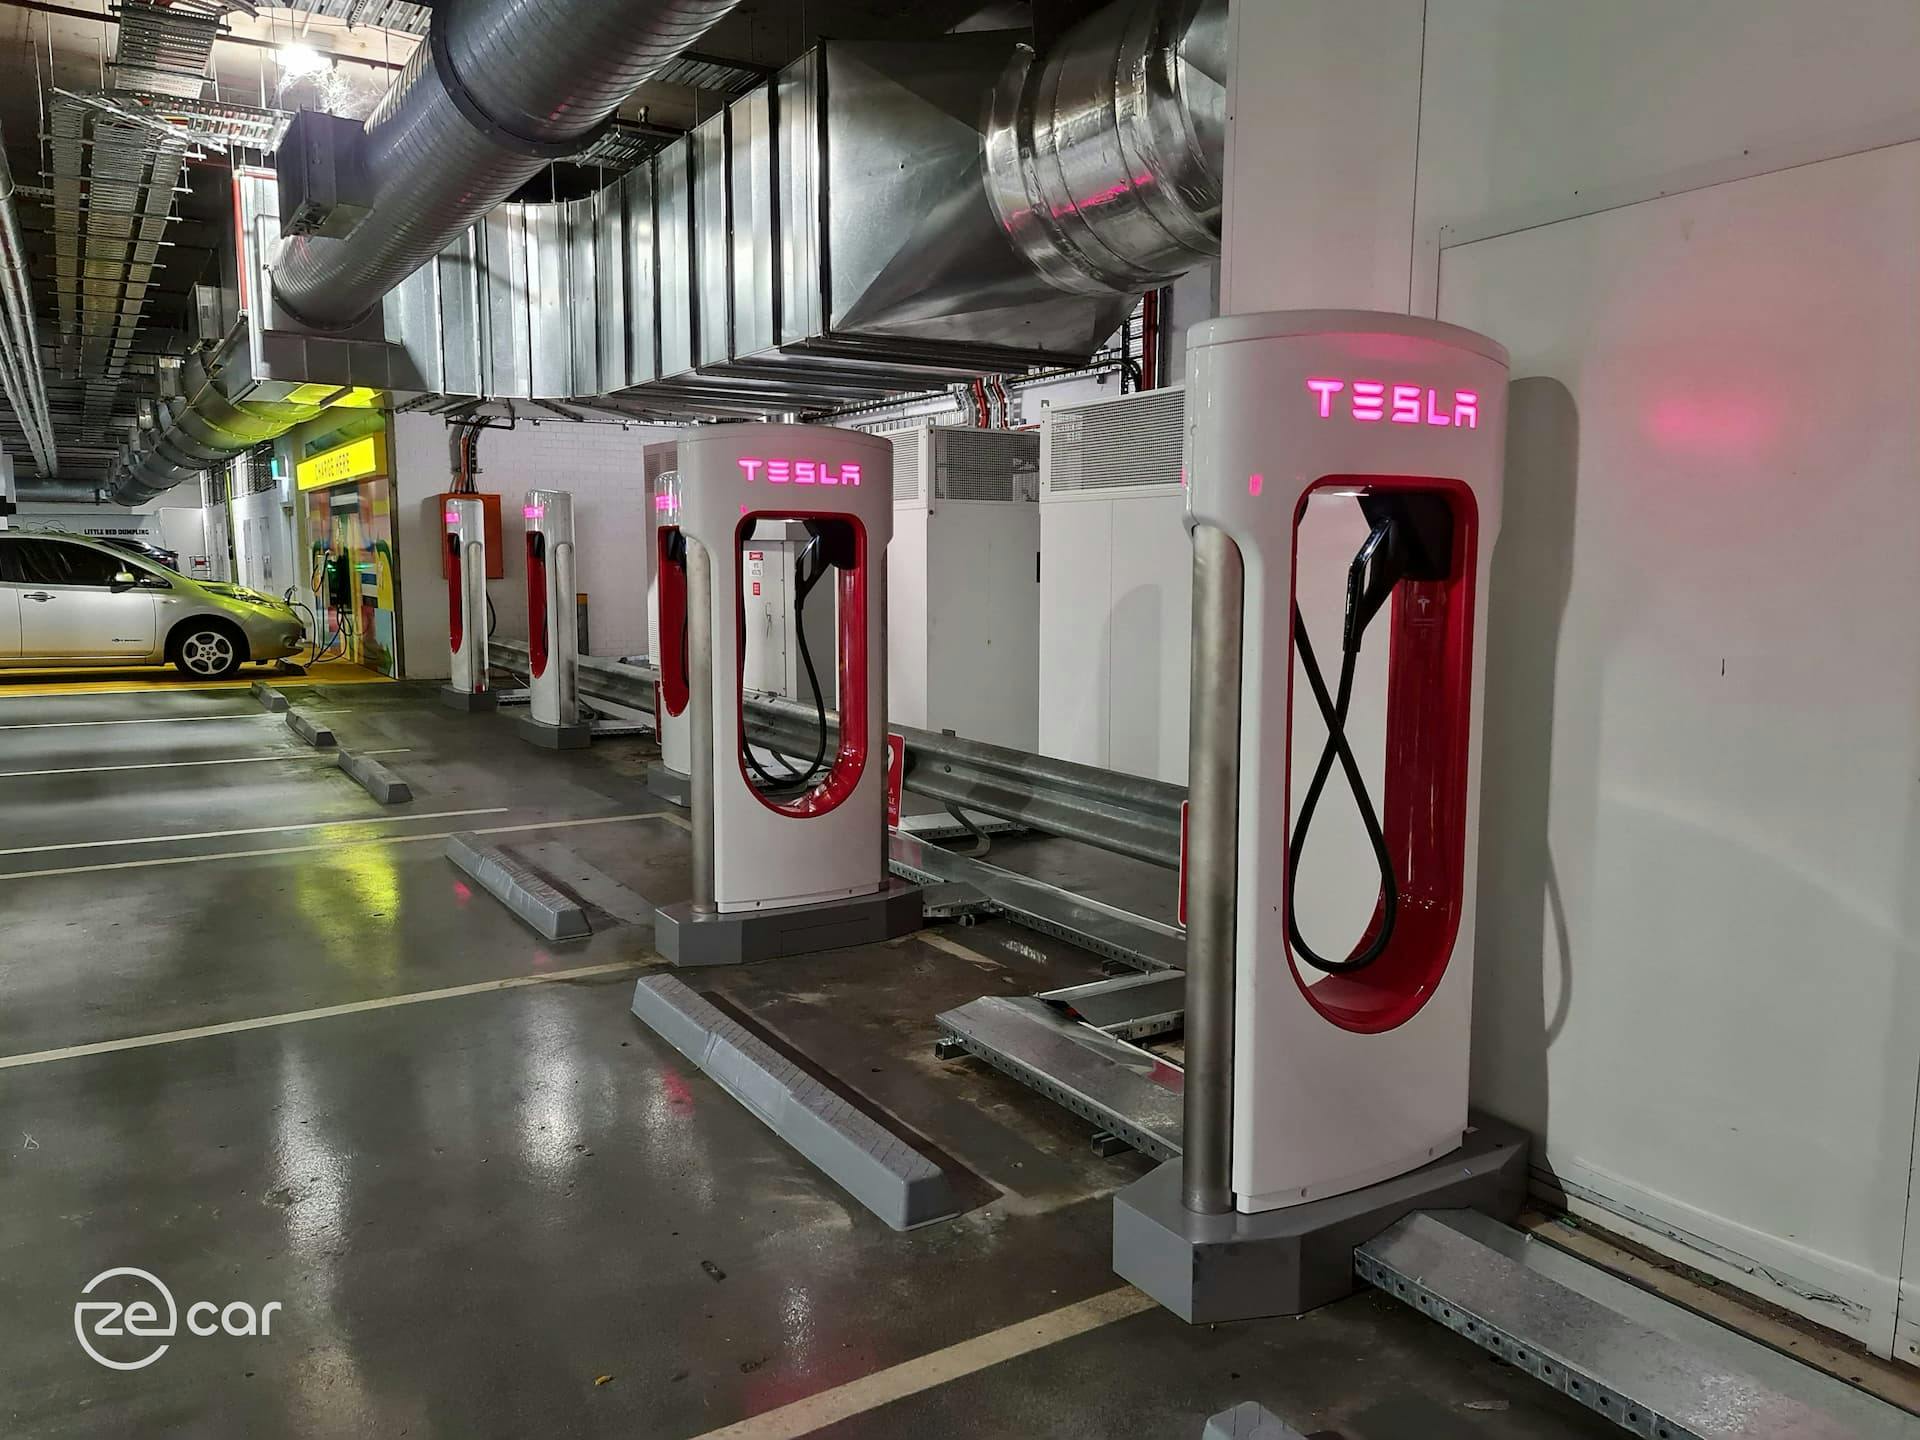 Tesla superchargers at Indooroopilly